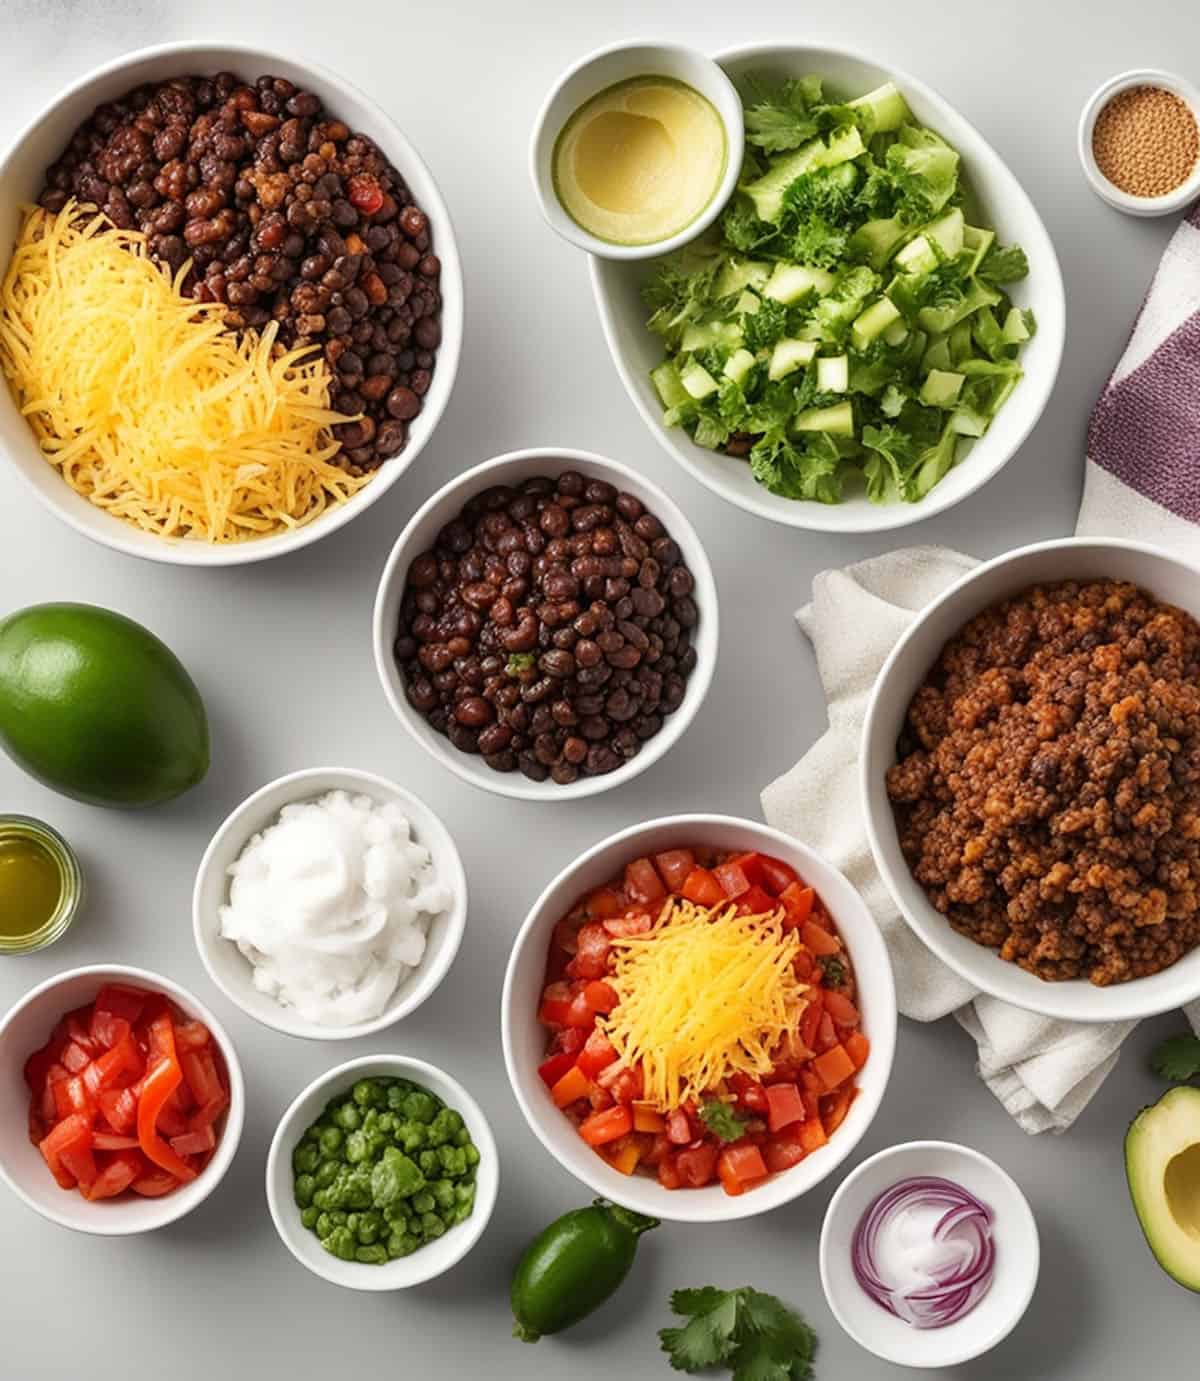 Ingredients for Taco Casserole in white bowls.